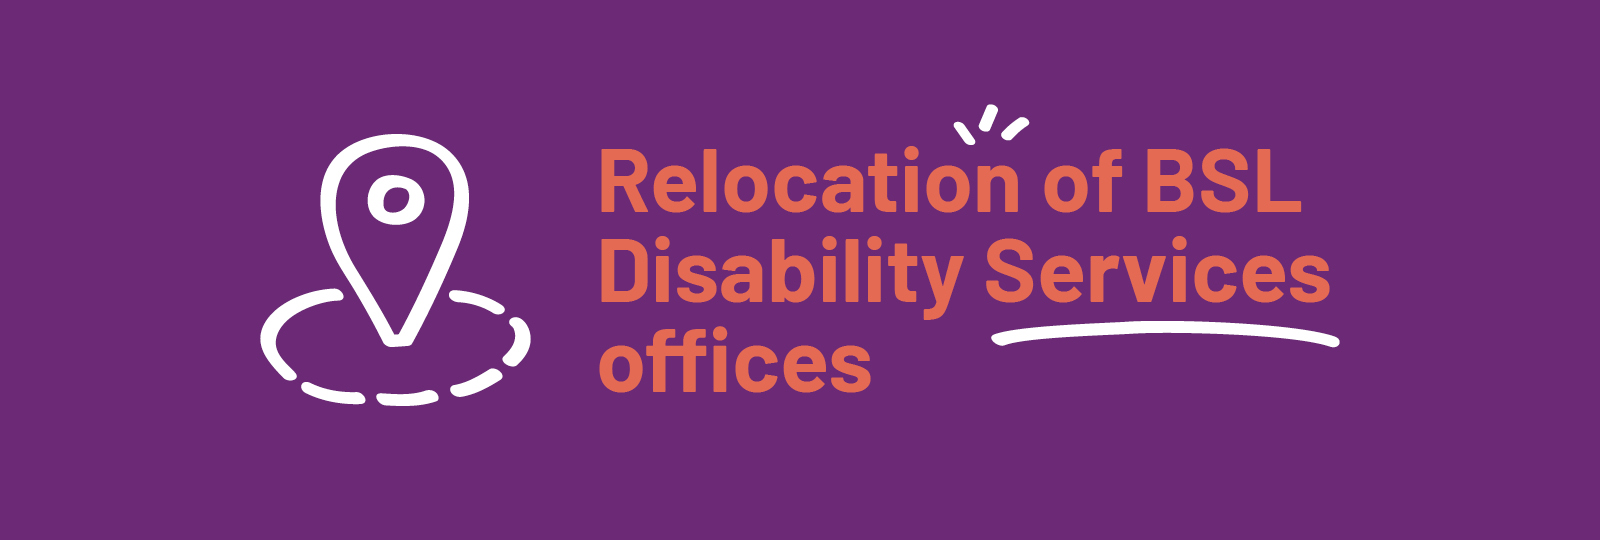 Relocation of BSL Disability Services offices